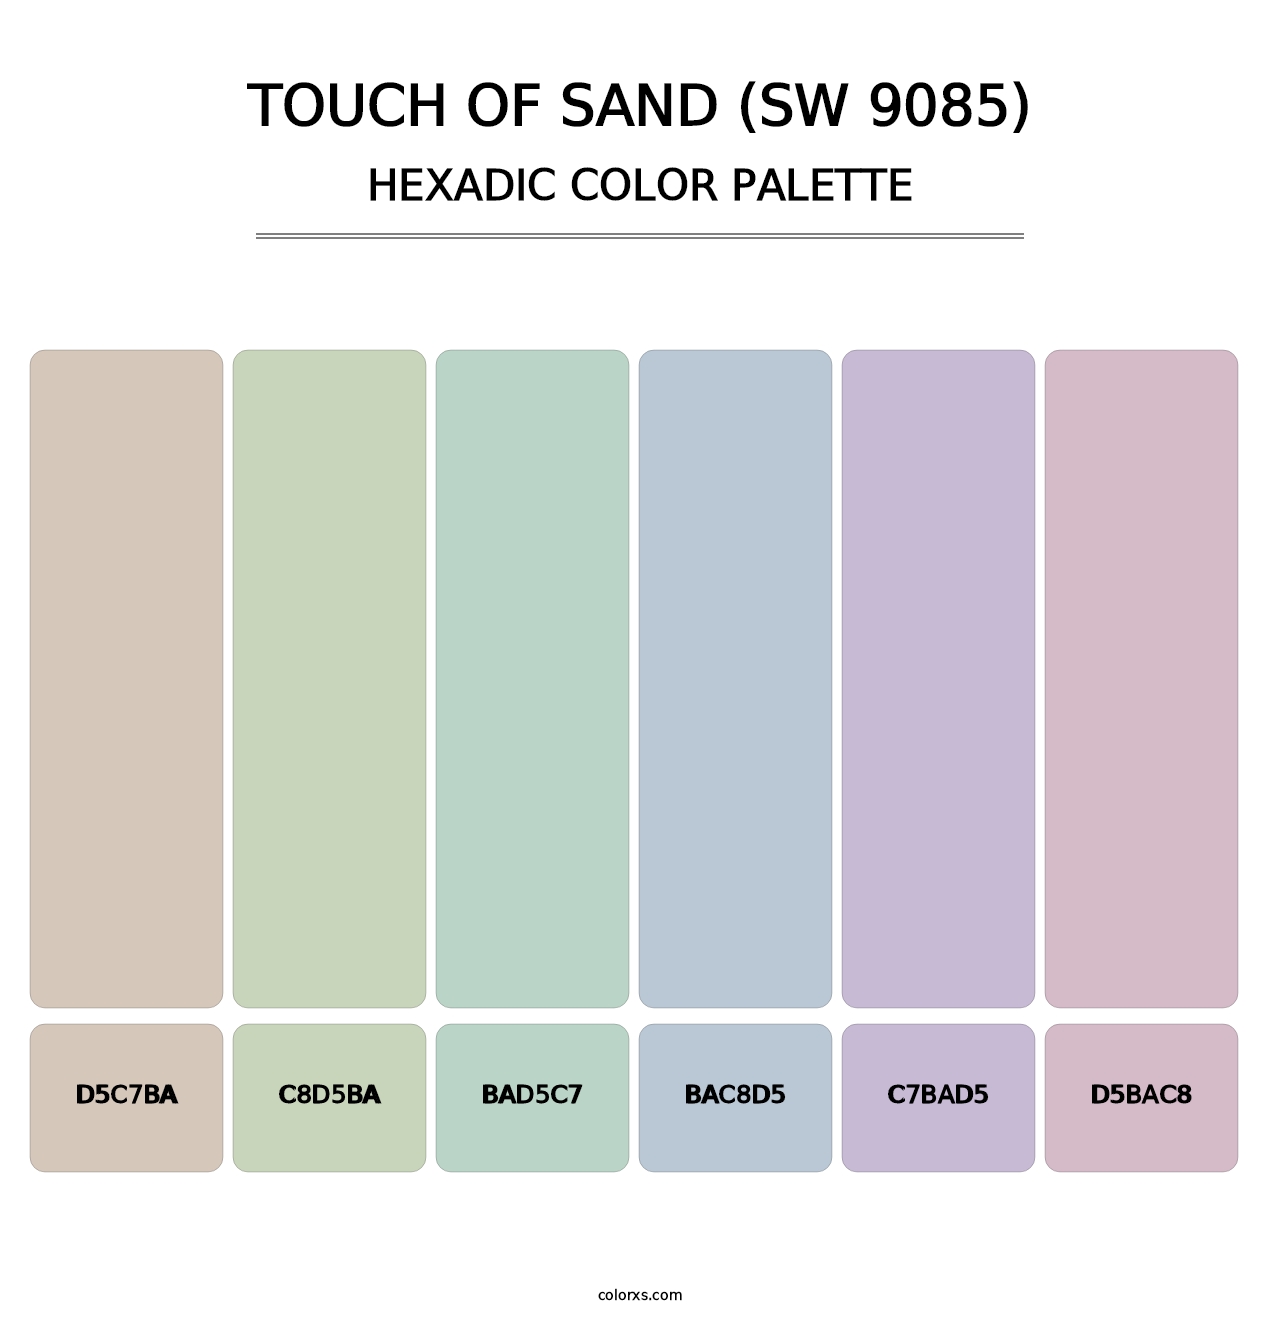 Touch of Sand (SW 9085) - Hexadic Color Palette